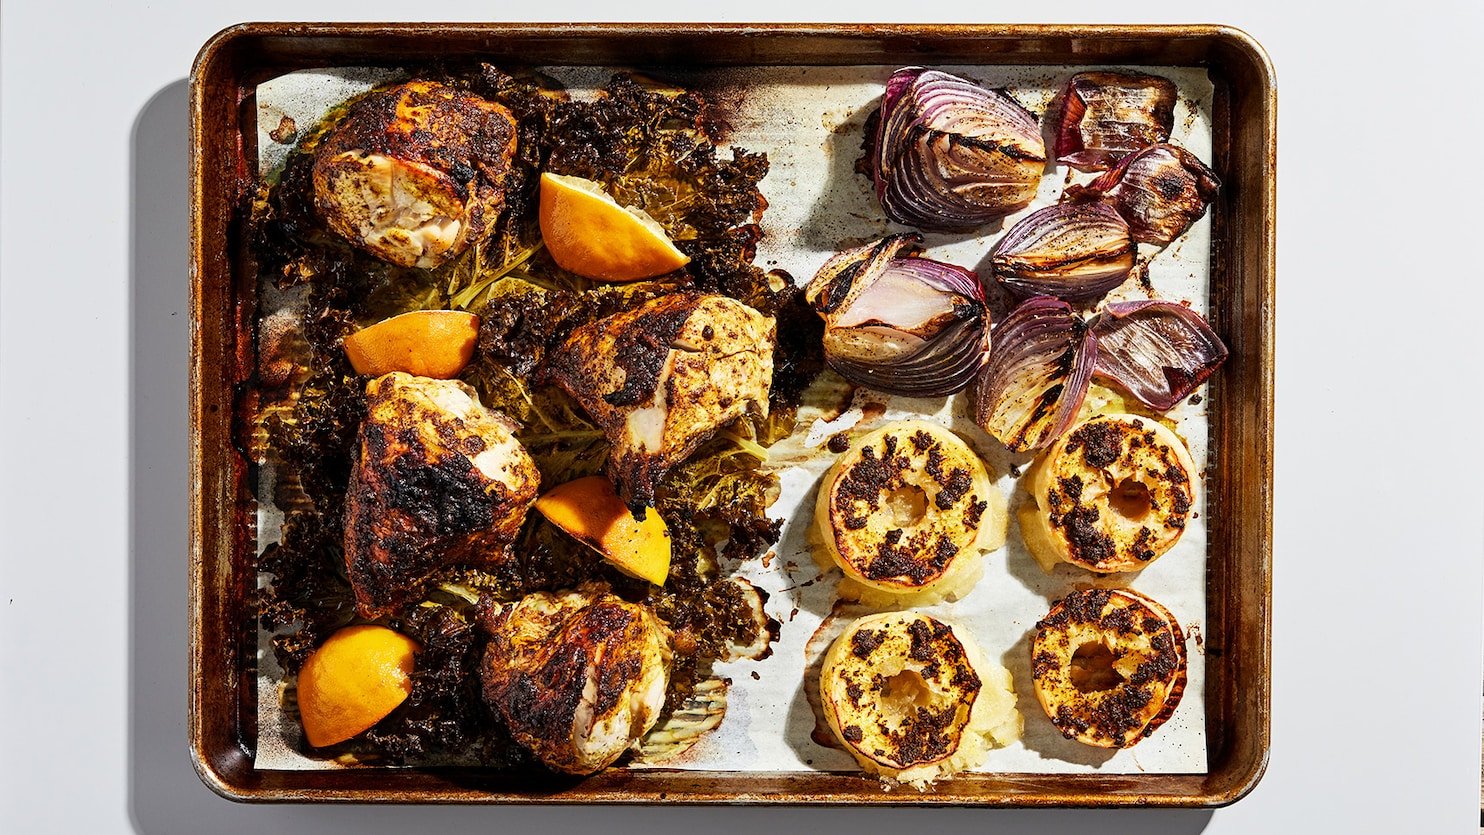 Dorie Greenspan's Sheet Pan Chicken With Apples and Kale - The Washington Post